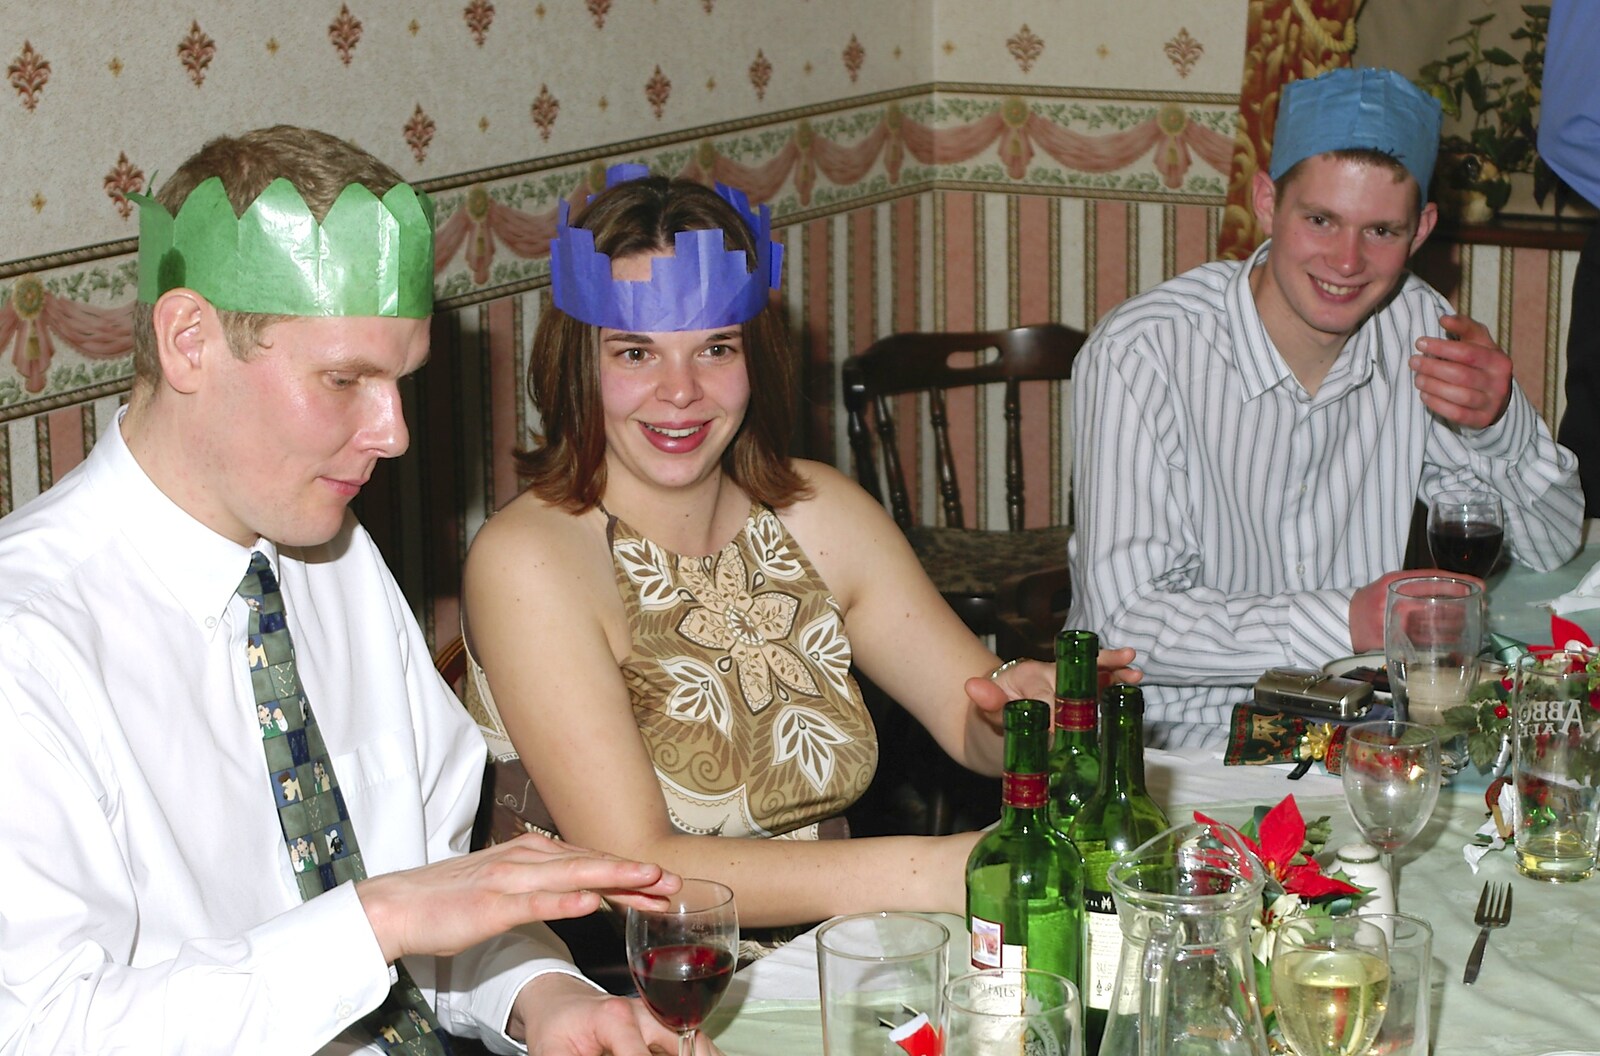 The BSCC Annual Dinner, The Brome Swan, Suffolk - 4th December 2004: Bill and Jen do musical glasses